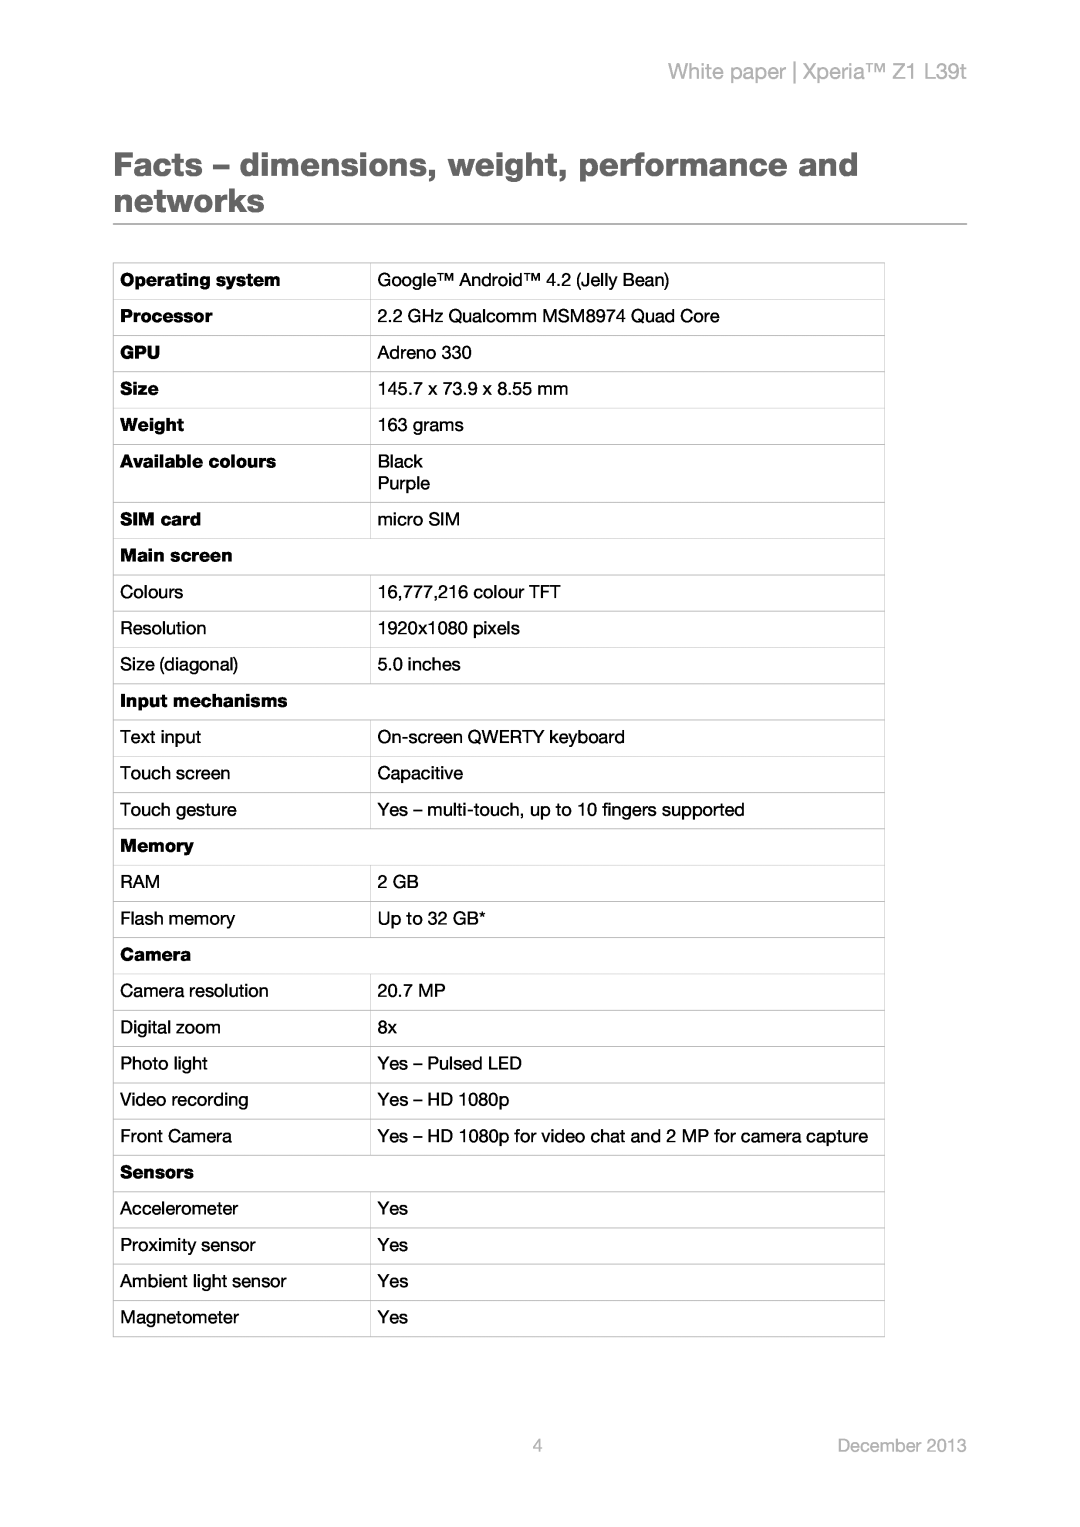 Sony manual Facts - dimensions, weight, performance and networks, White paper Xperia Z1 L39t, December 